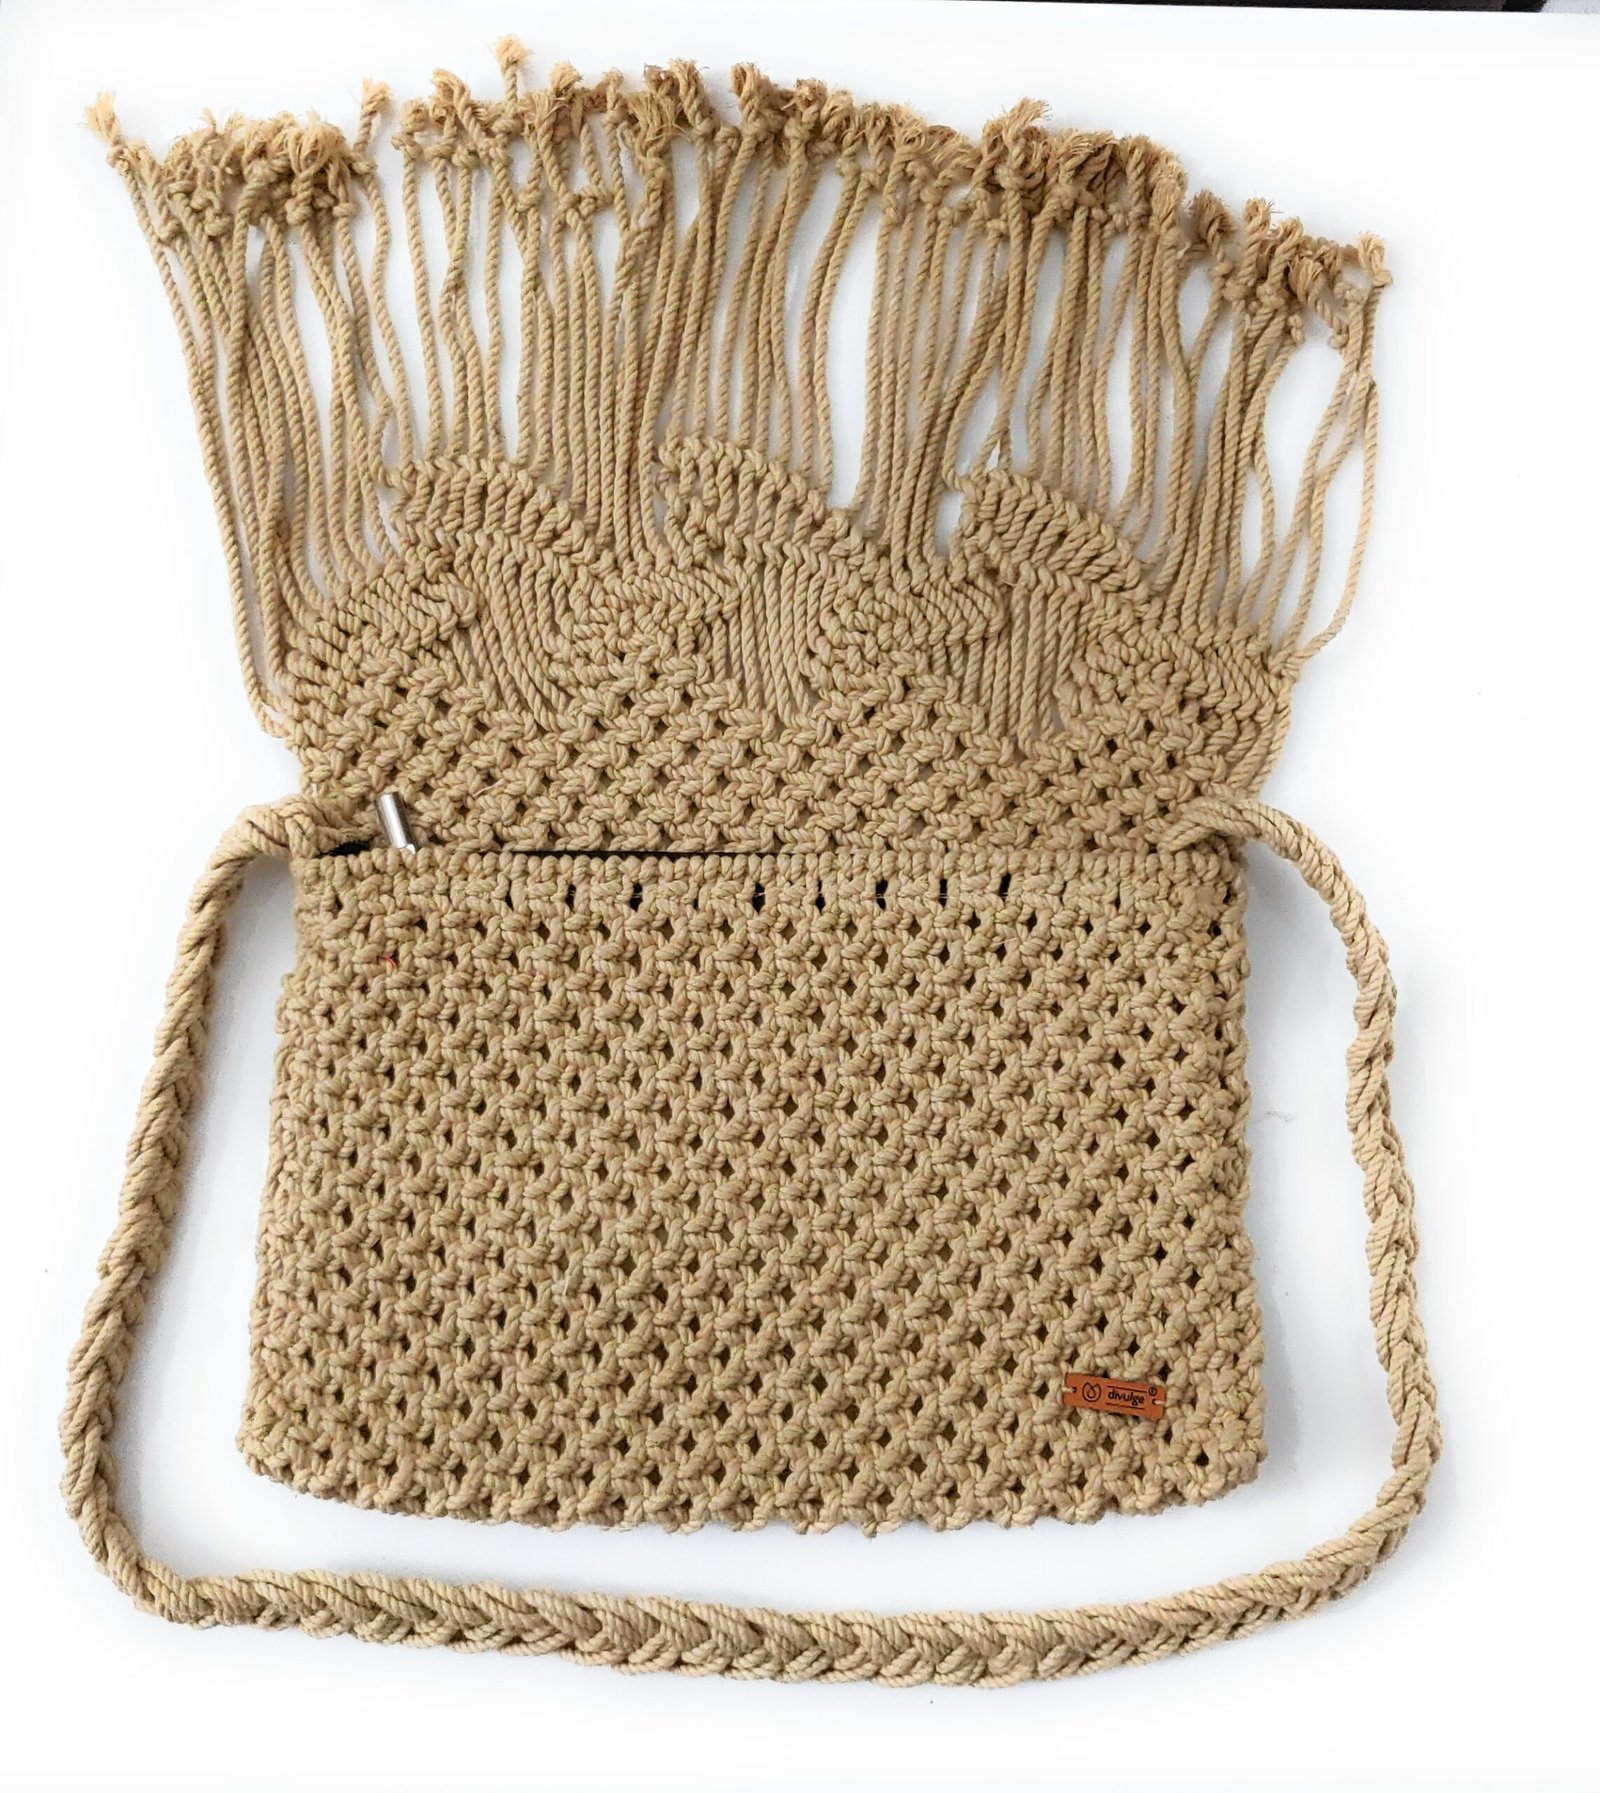 cotton macrame bags from divulge